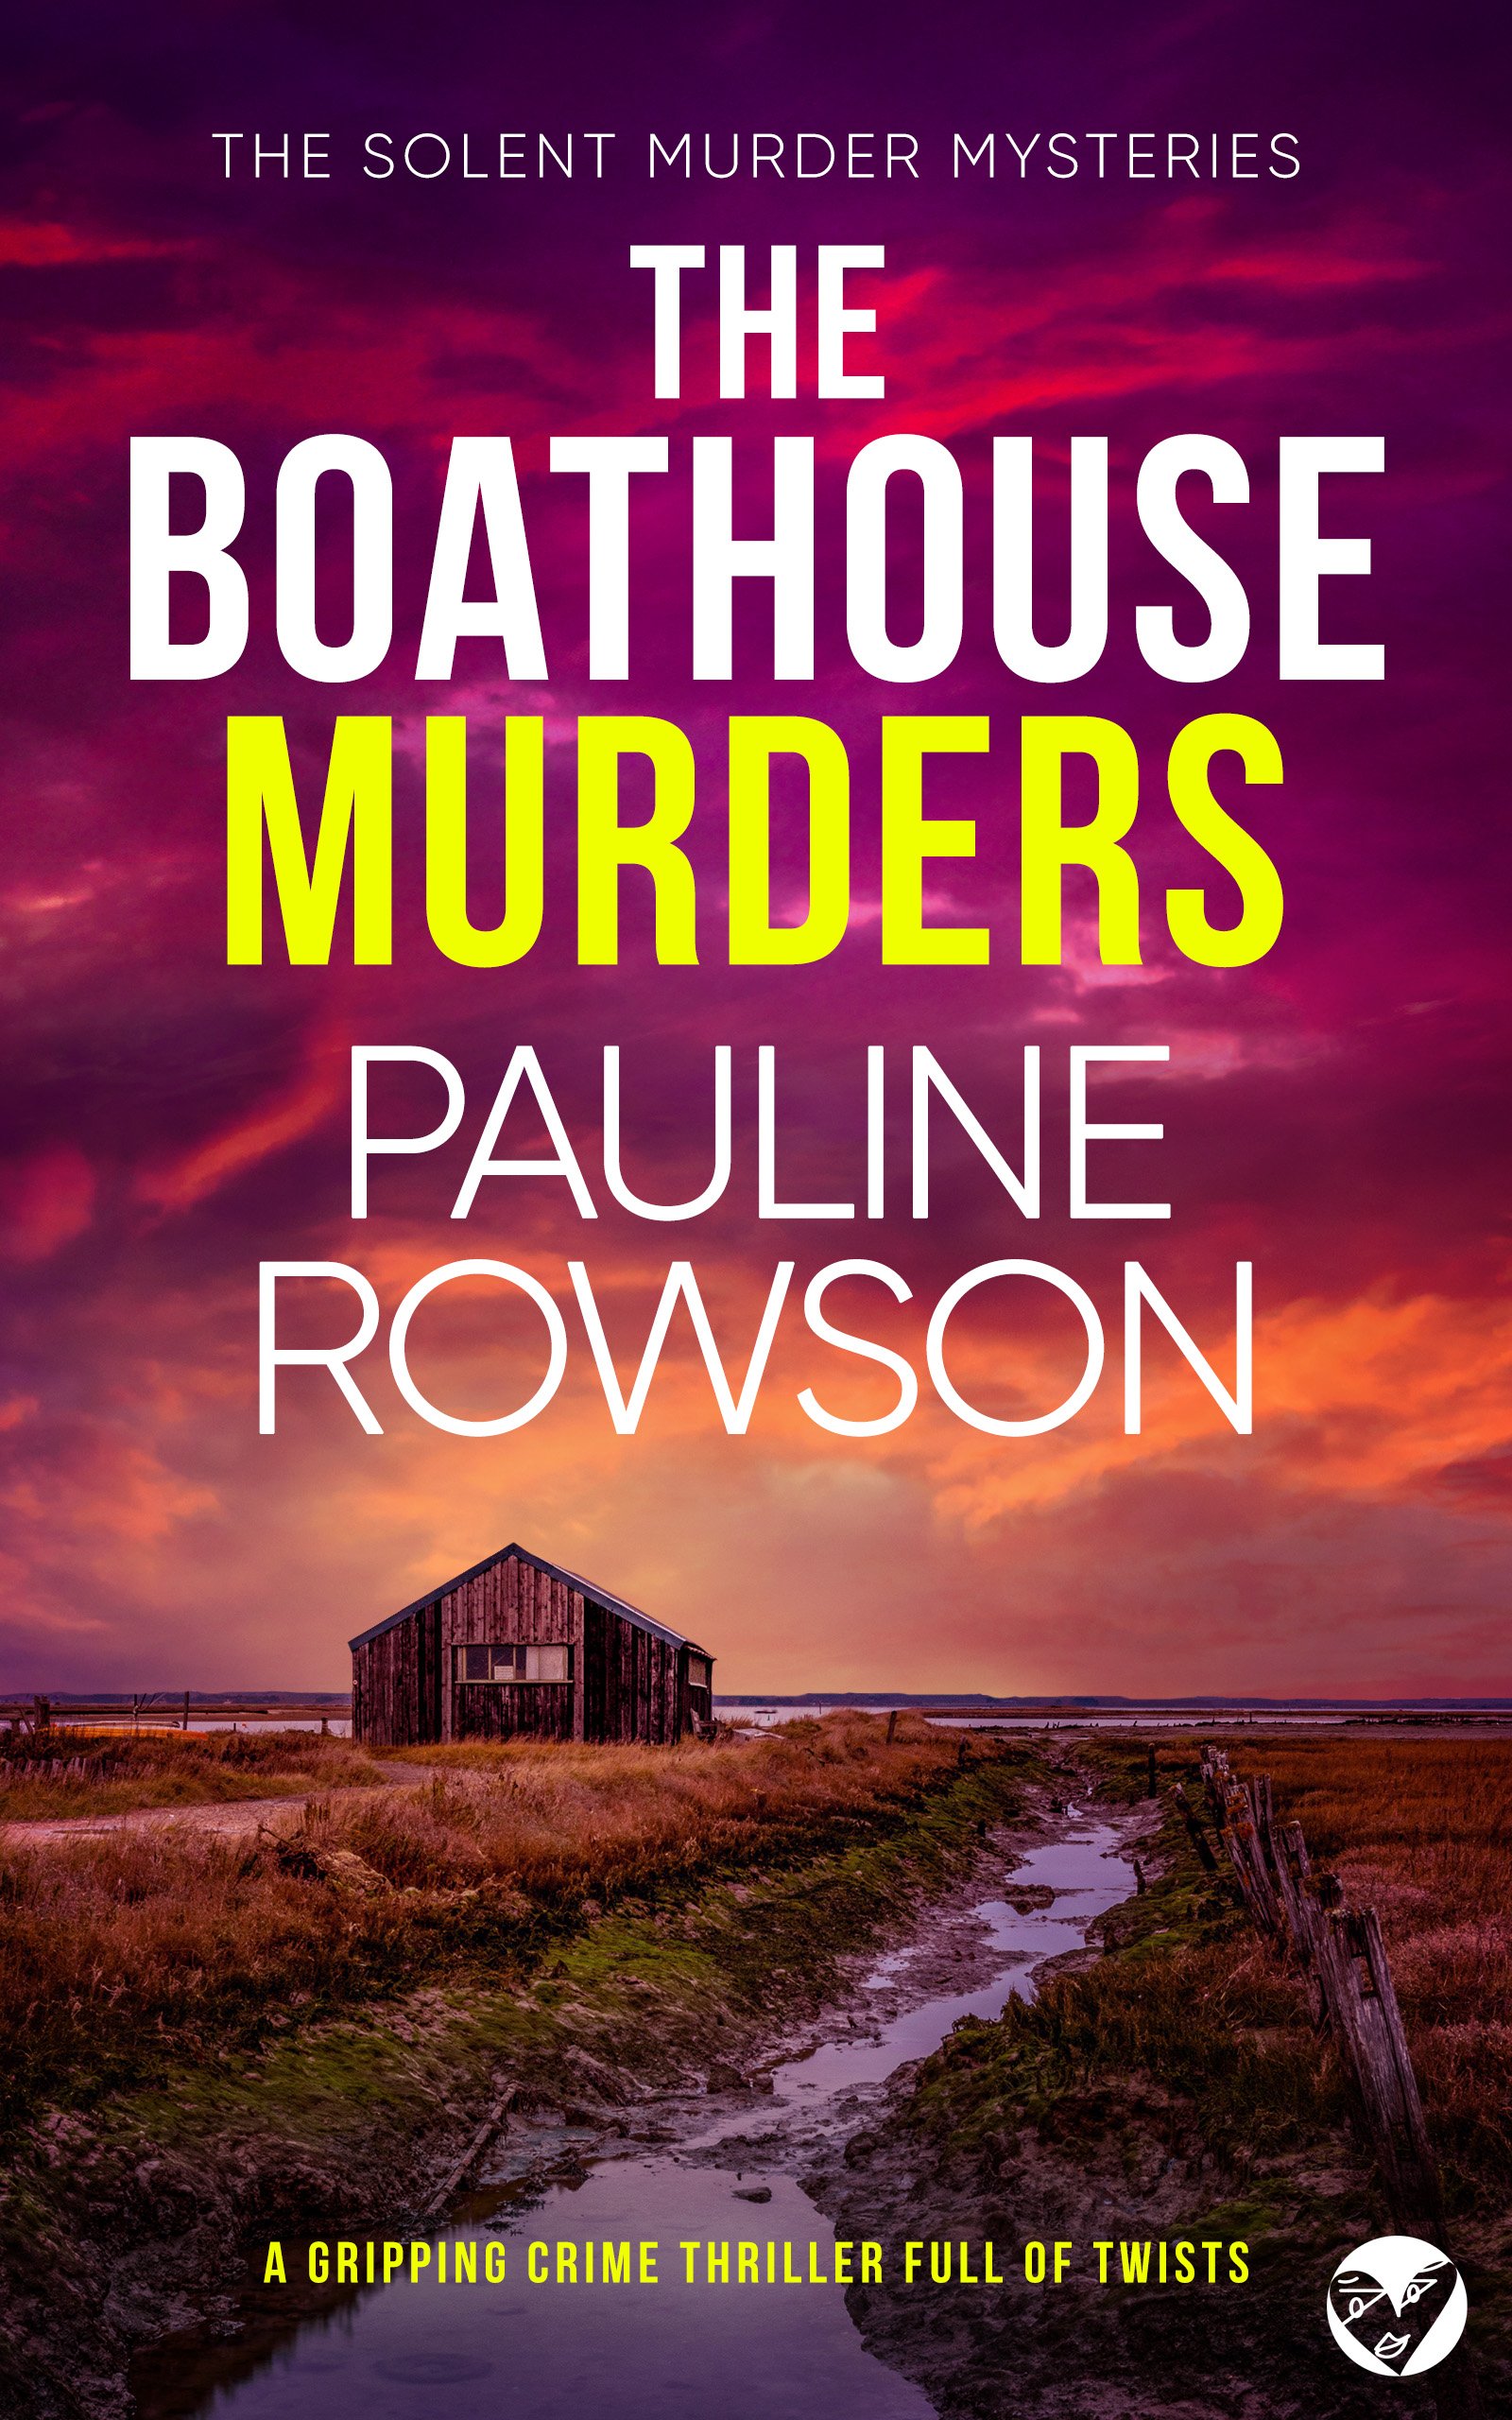 THE BOATHOUSE MURDERS Cover publish.jpg